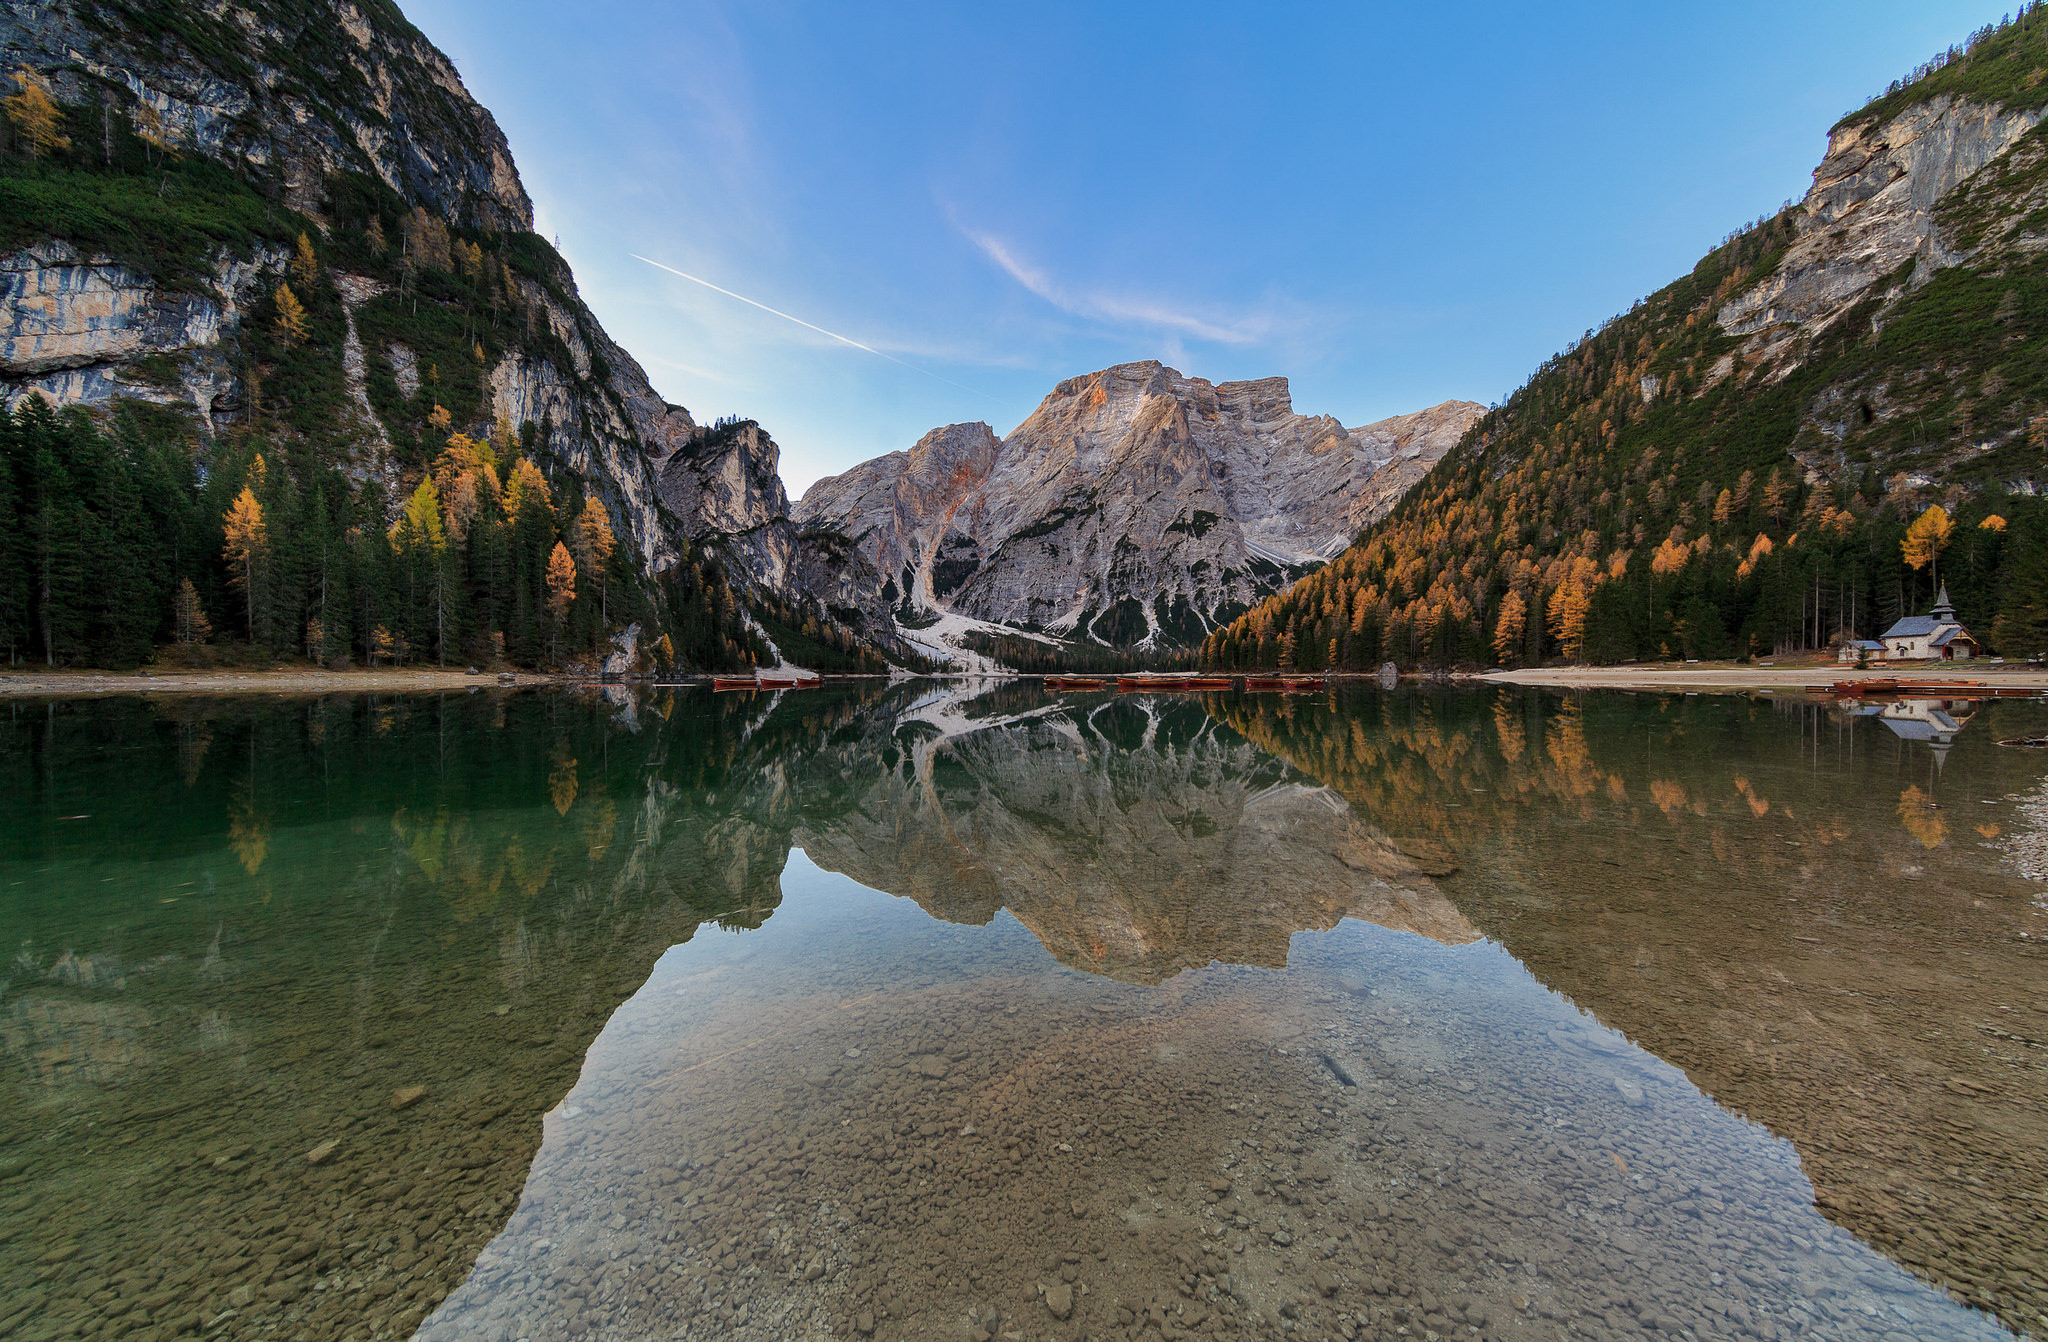 General 2048x1342 landscape mountains trees lake reflection boat sky nature Pragser Wildsee Italy South Tyrol